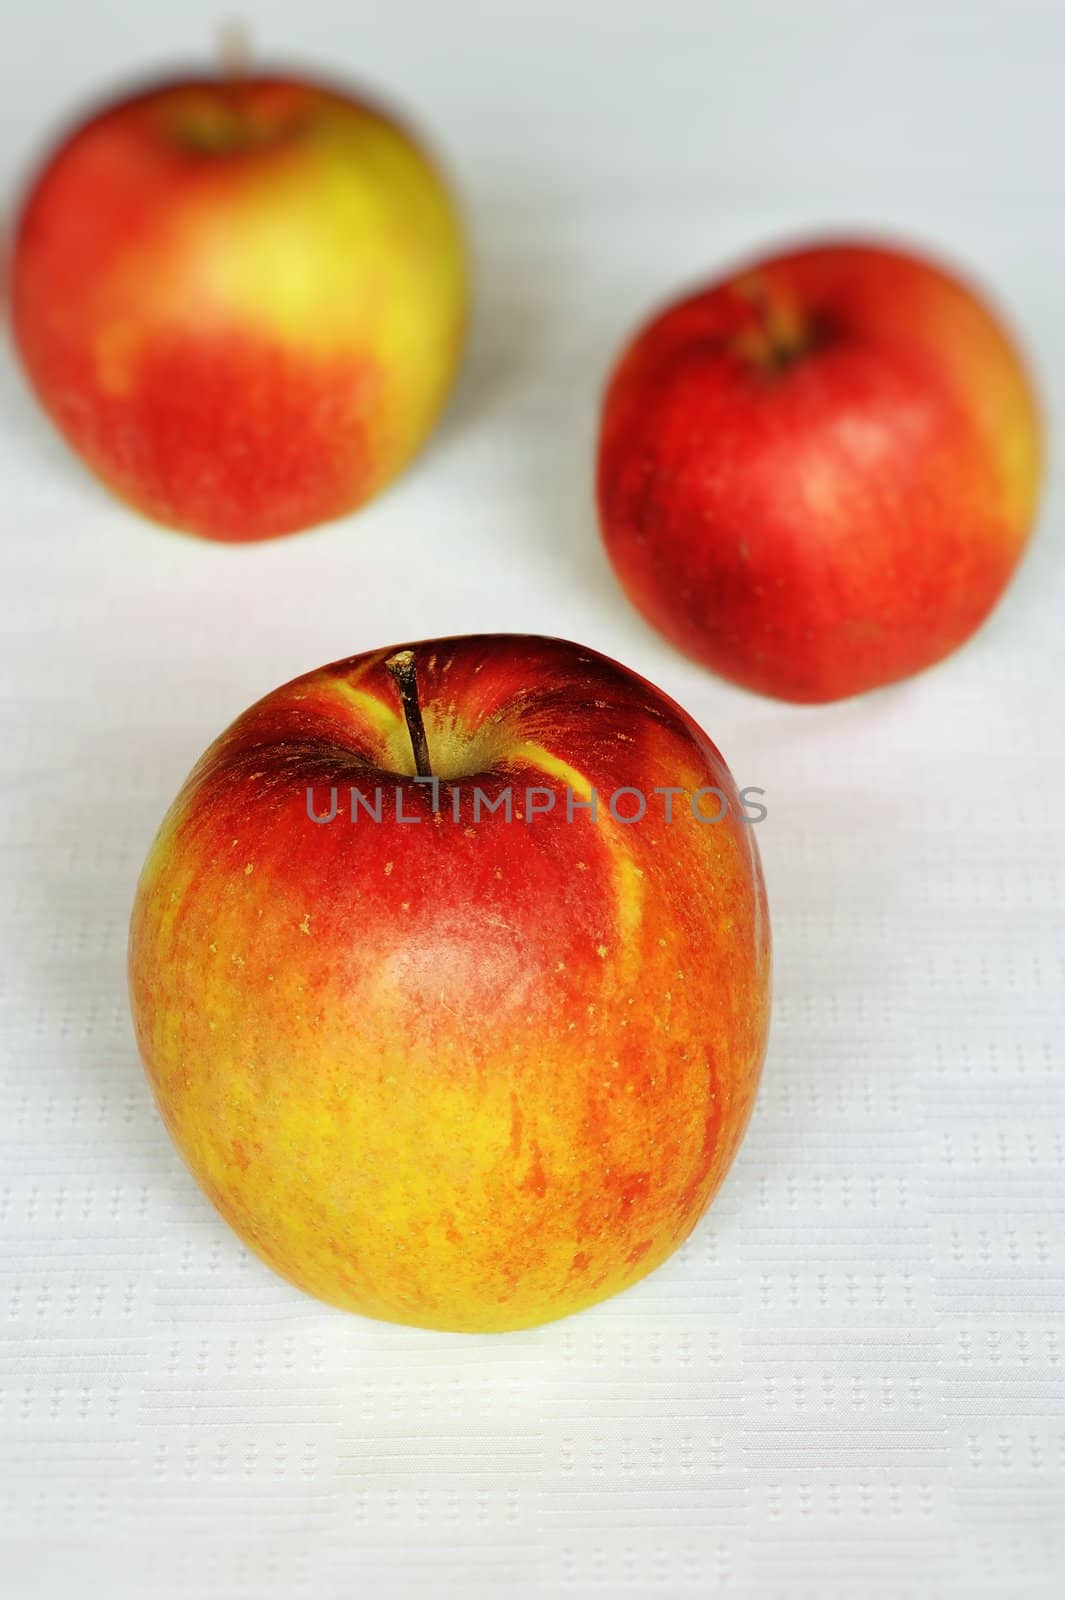 An image of a group of apples on the table